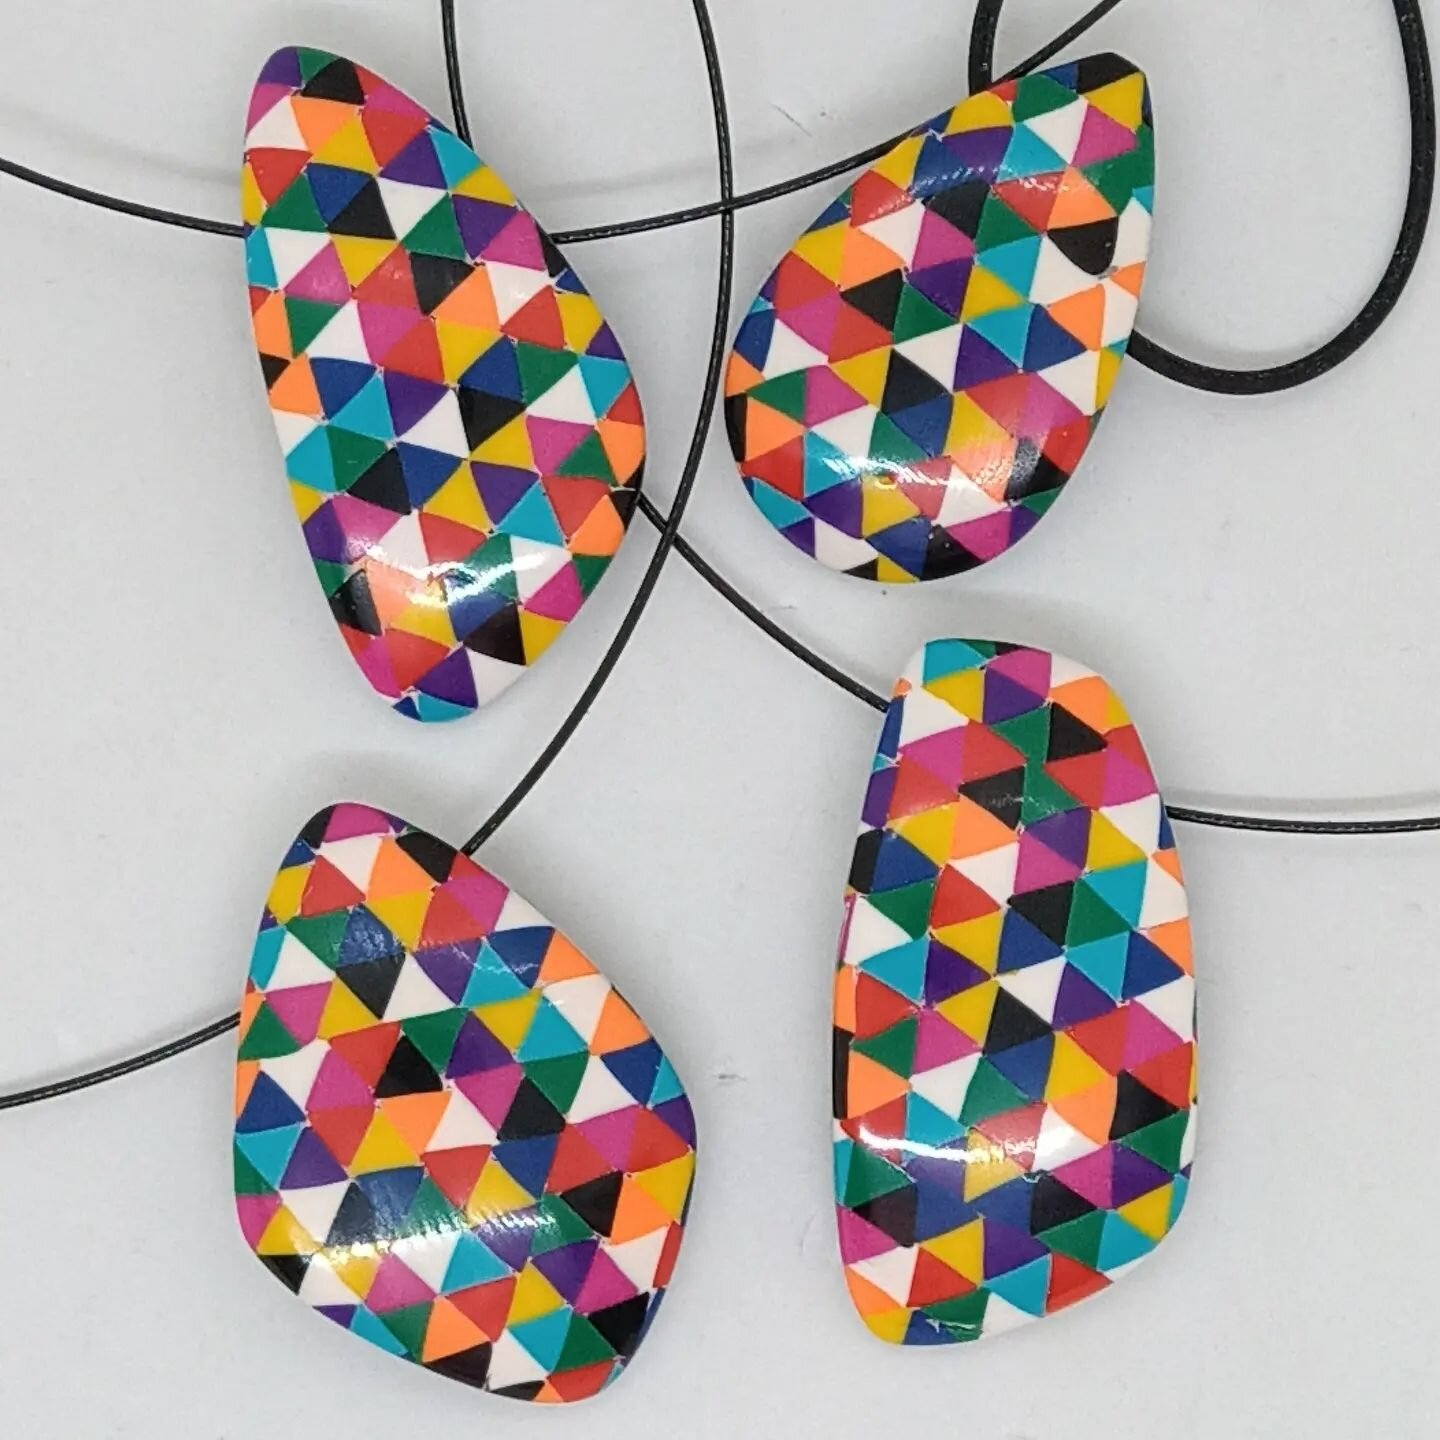 Harlequin pendants have been sanded and polished and are available on my website link.

It may be a few days until I manage to complete the earrings as we have a busy weekend ahead 

#polymerclaypendants #polymerclaydesigns #polymerclaycane #newdesig